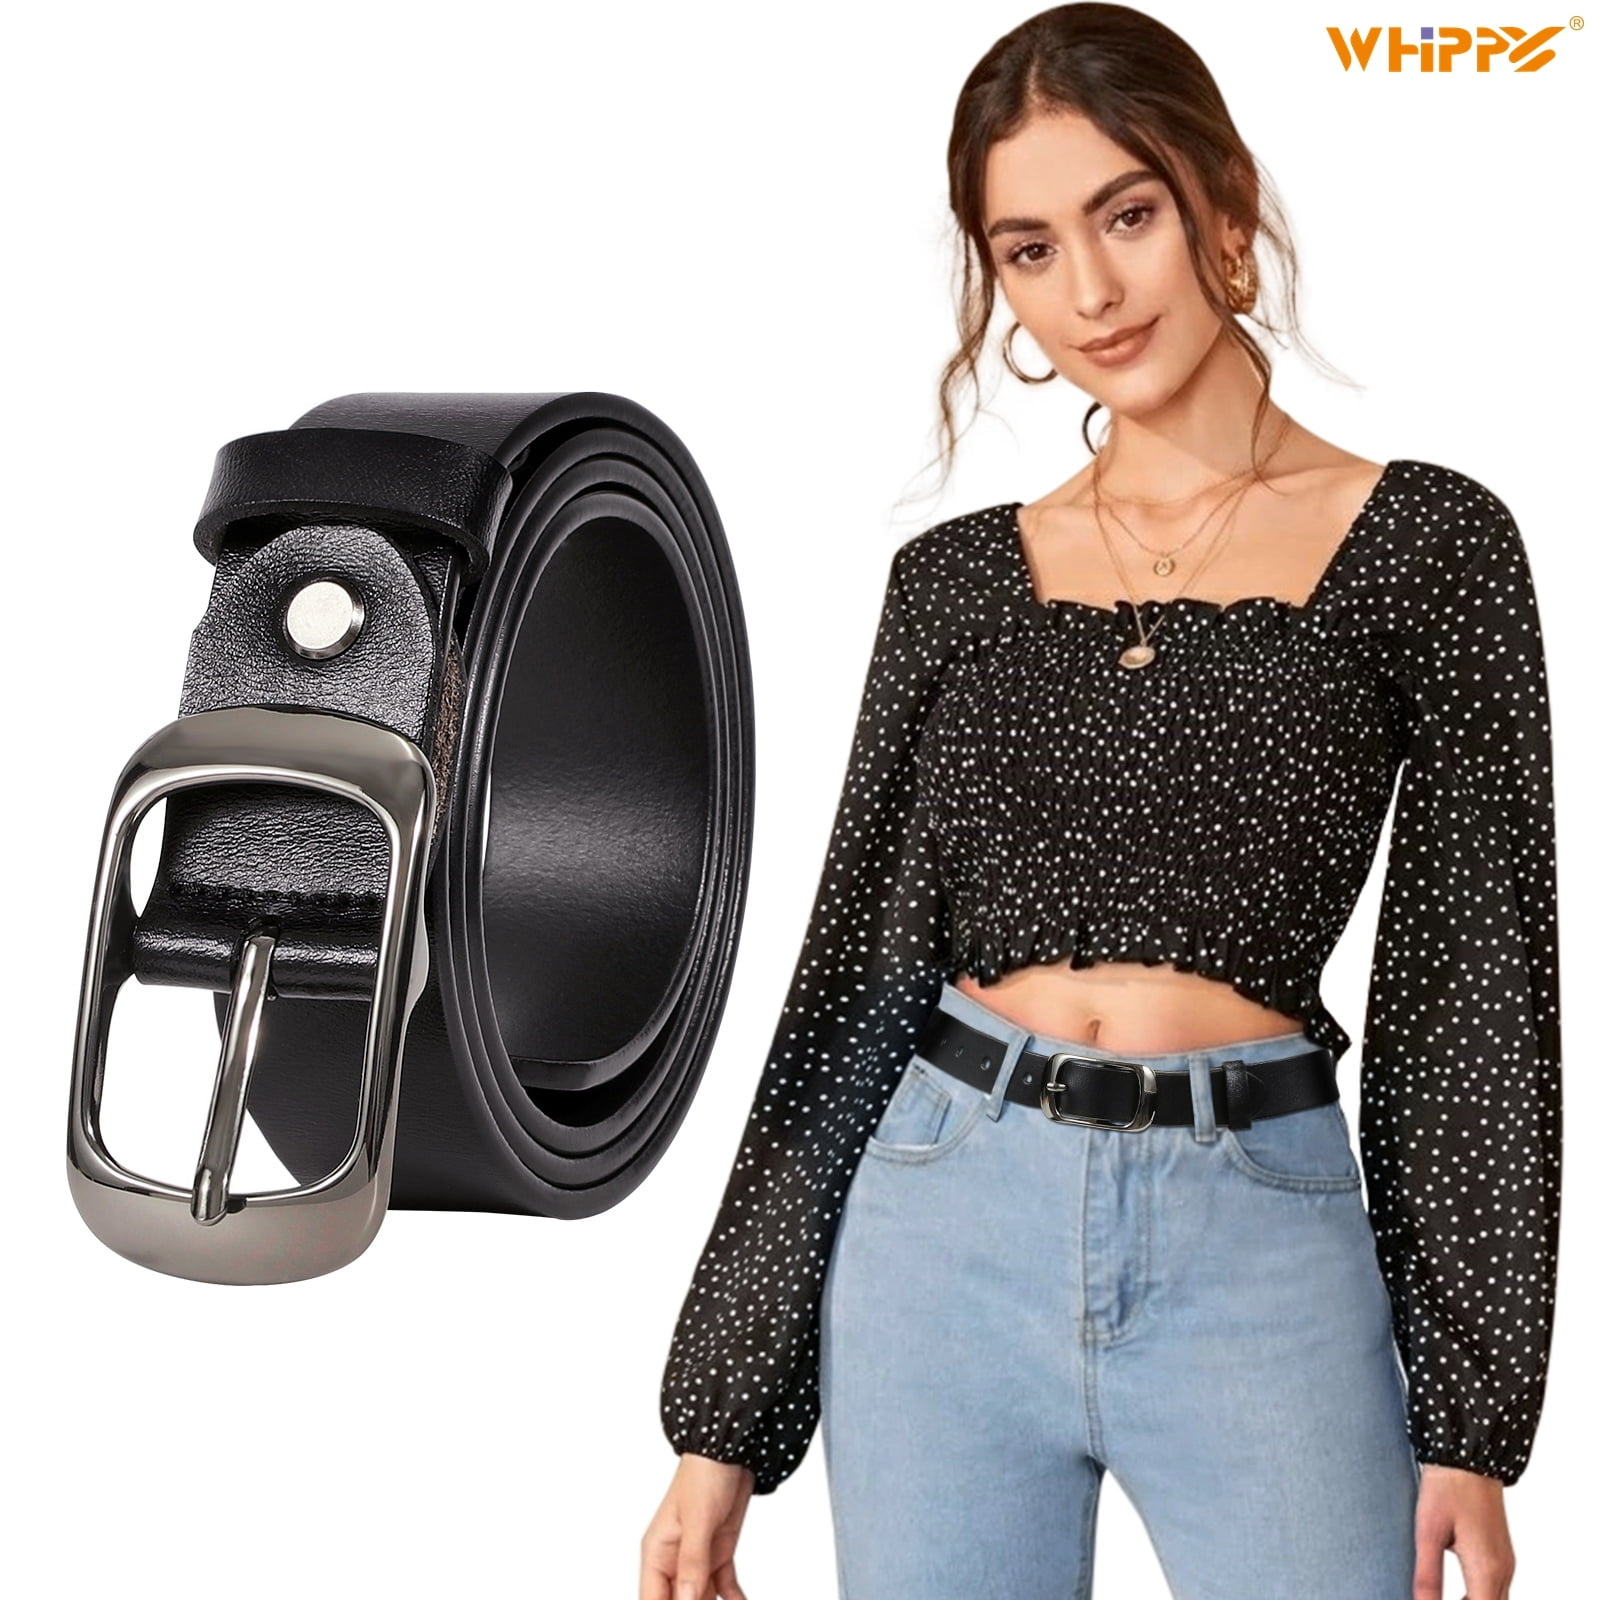 Whippy Set of 4 Women Skinny Leather Belt Thin Waist Belt with Metal Buckle for Pants Jeans Dresses